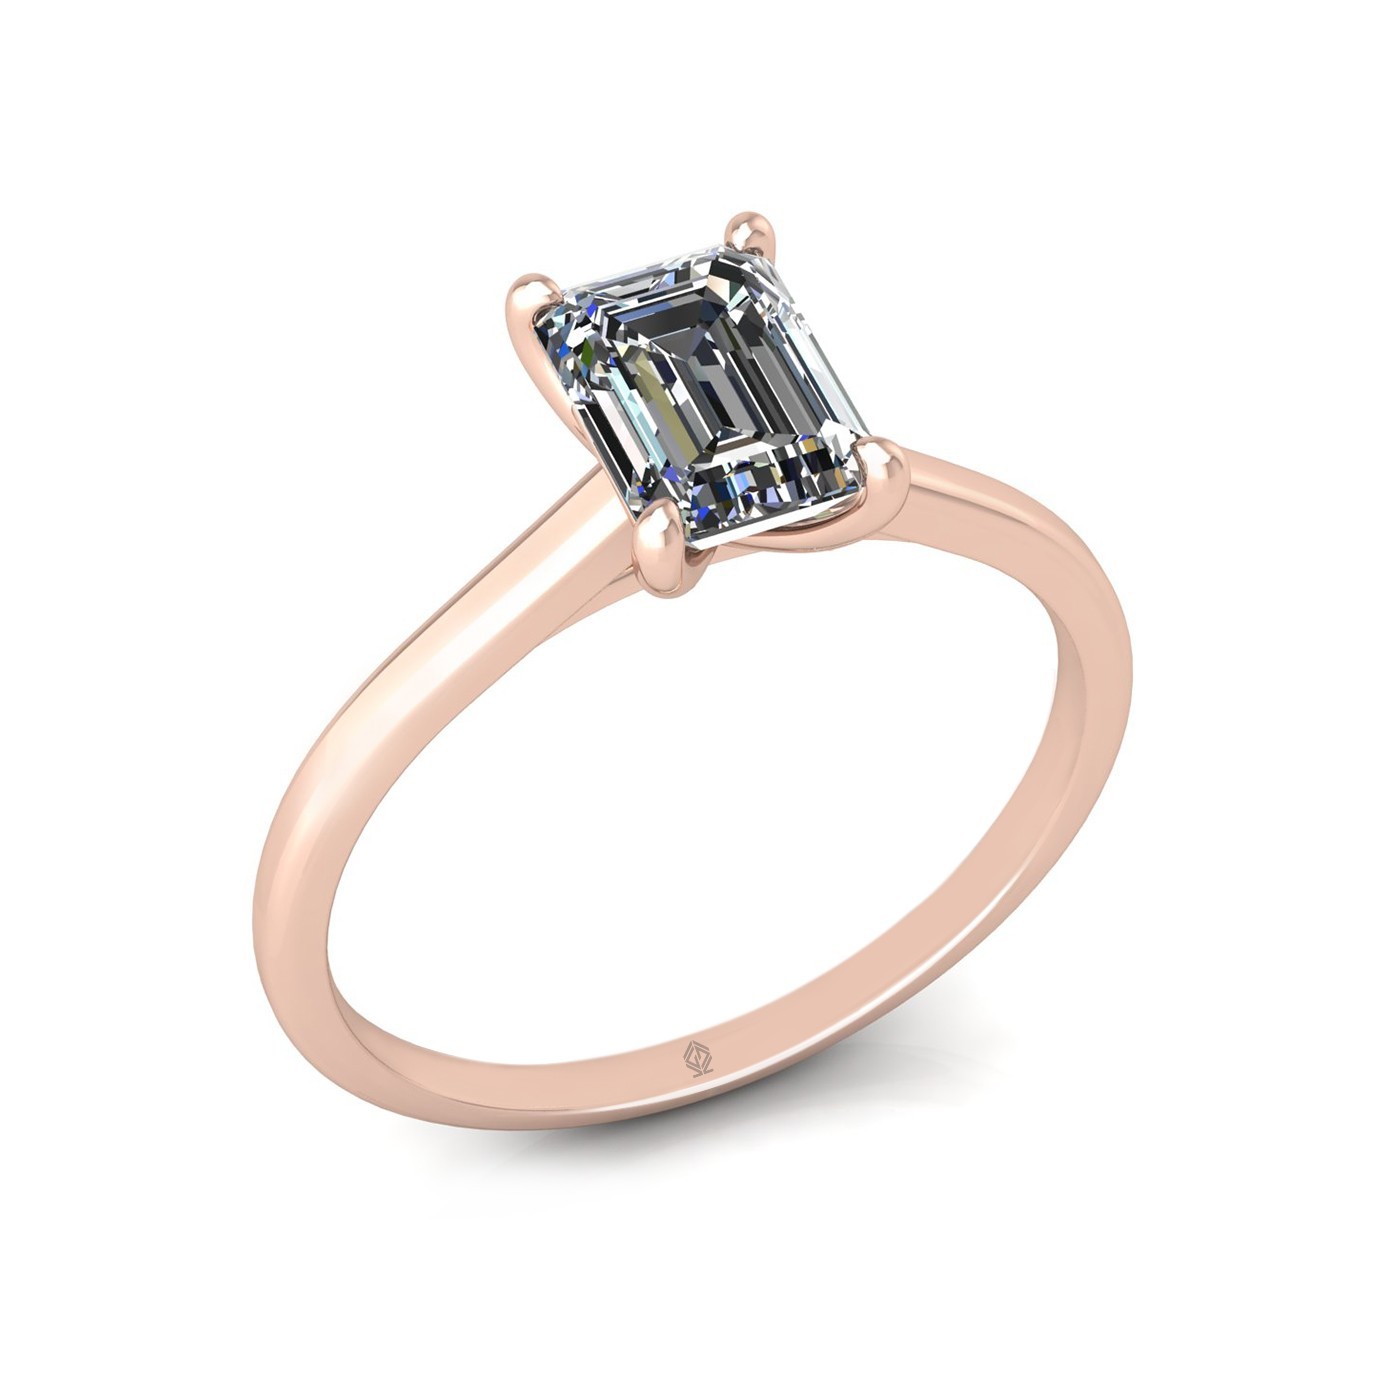 18K ROSE GOLD 4 PRONGS SOLITAIRE EMERALD CUT DIAMOND ENGAGEMENT RING WITH WHISPER THIN BAND